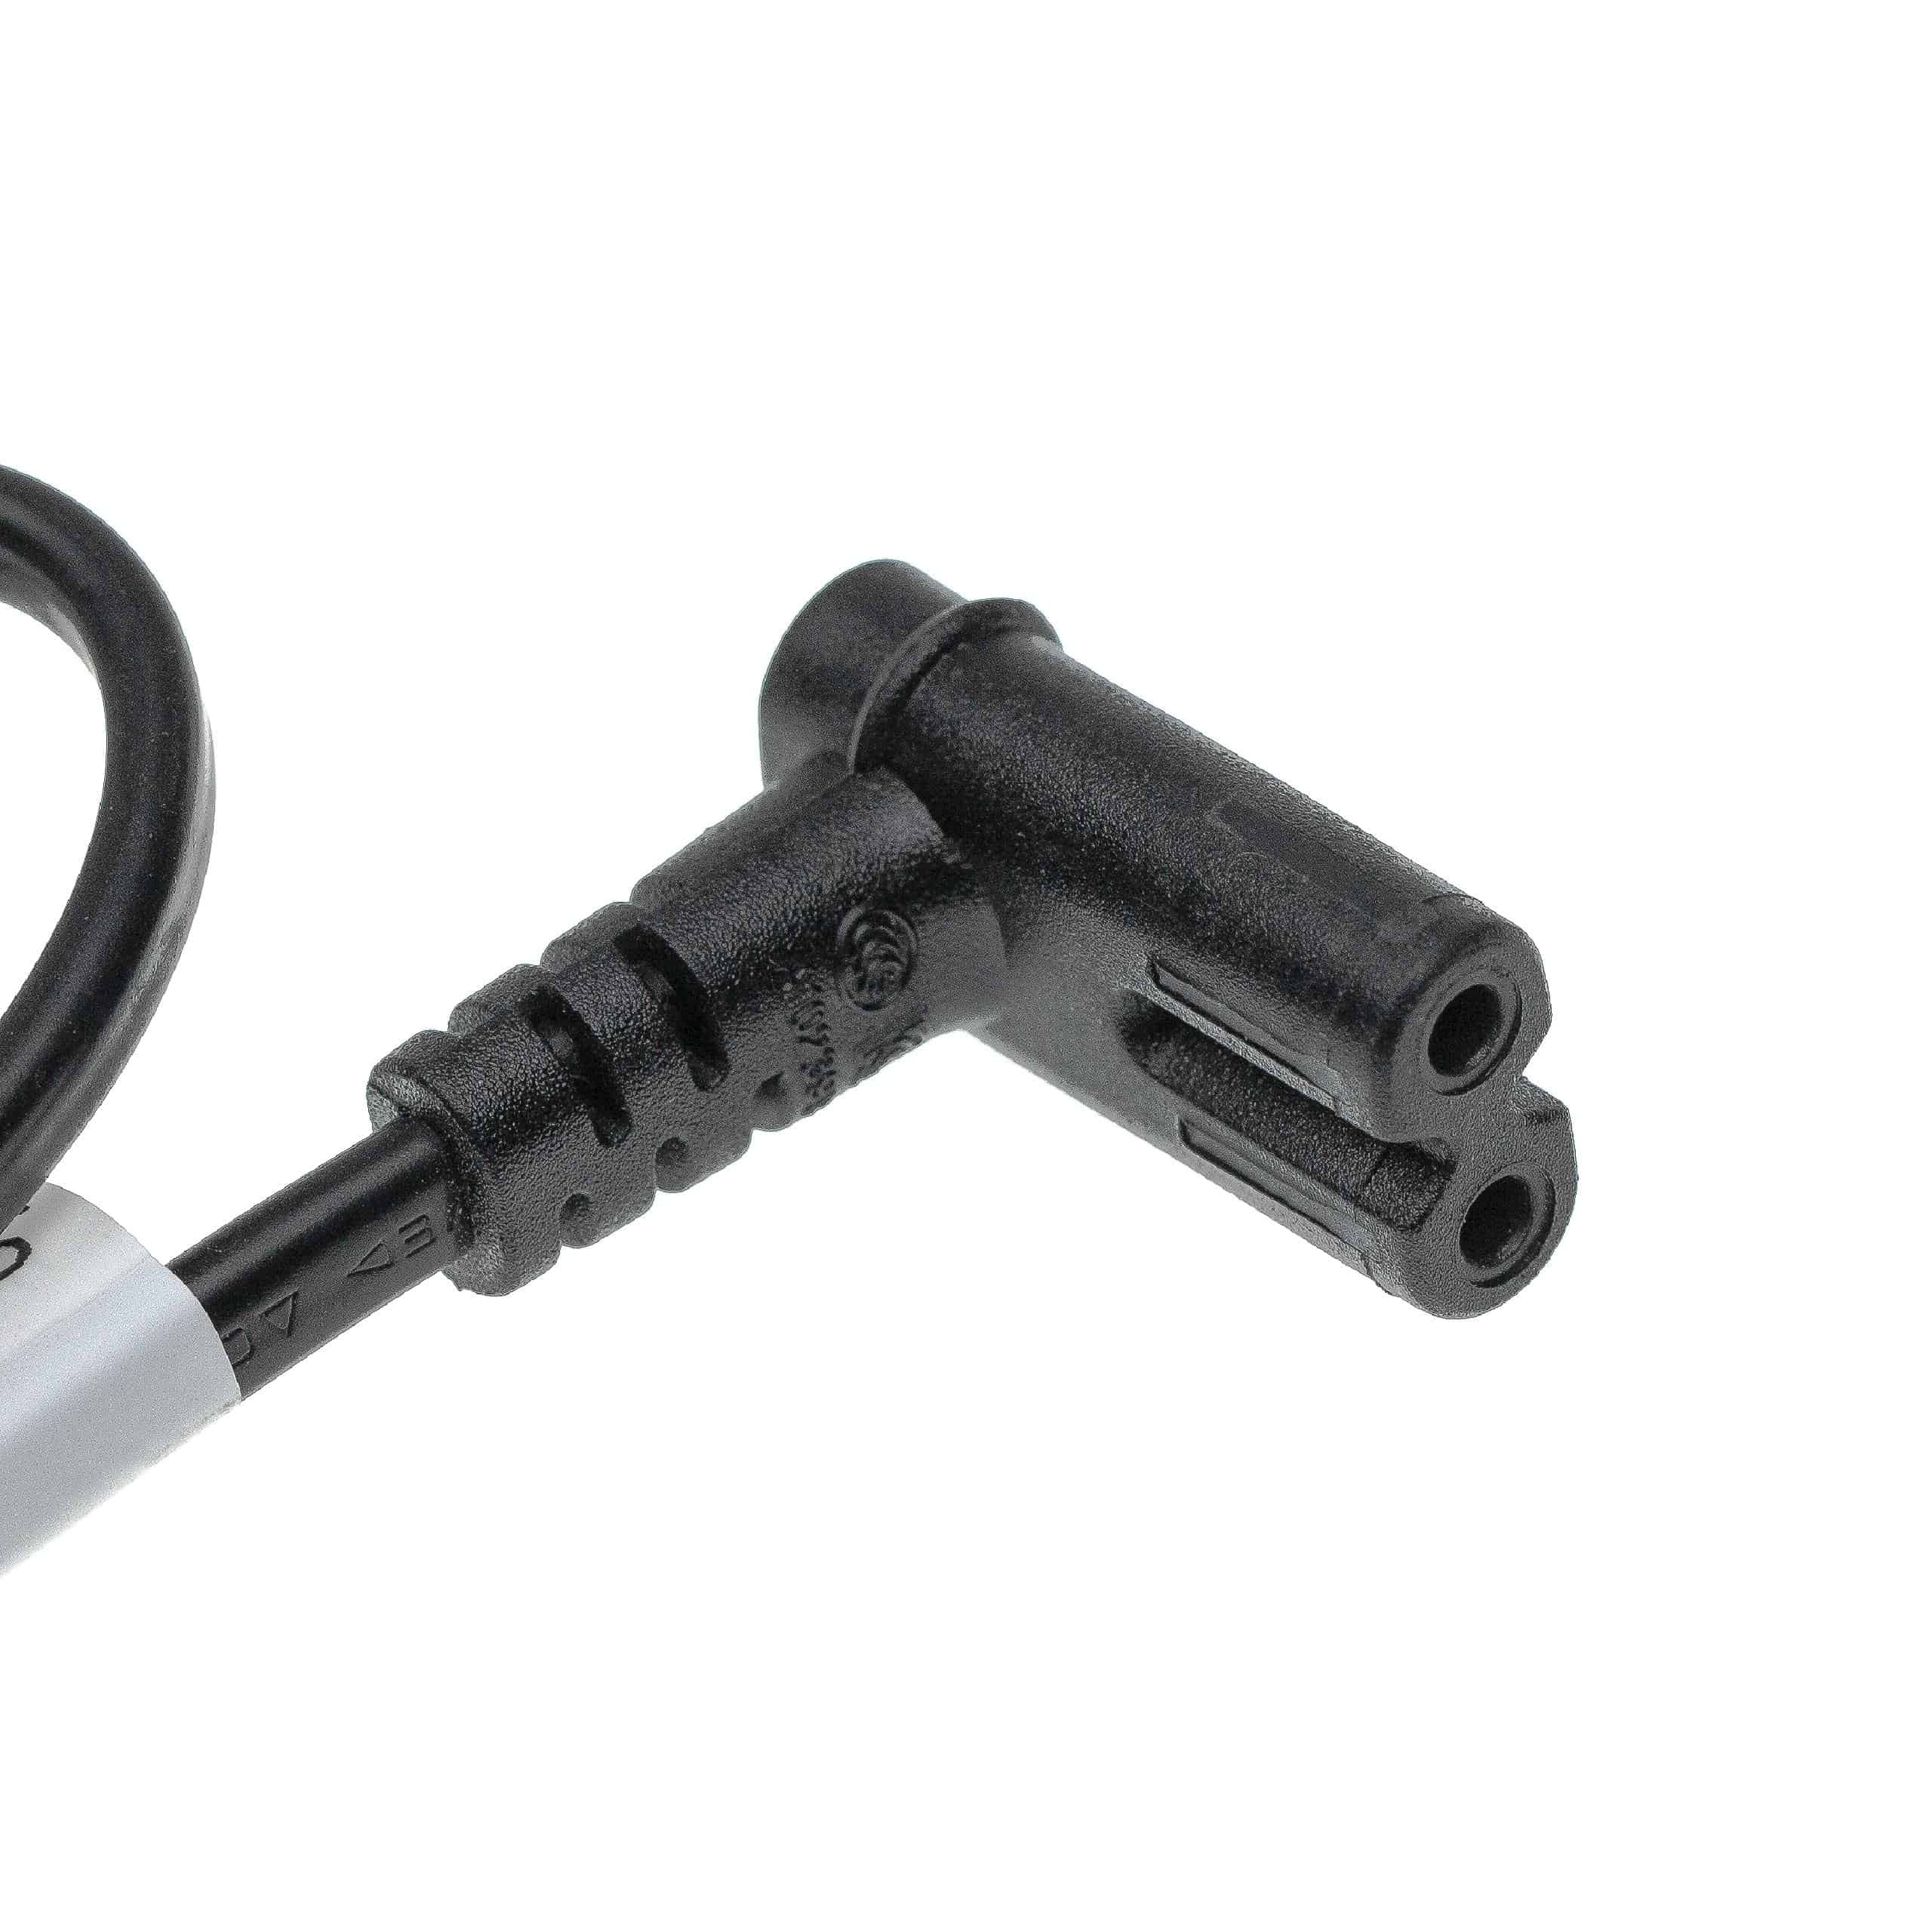 C7 Power Cable Euro Plug suitable for Devices - 1 m, 90° Angled